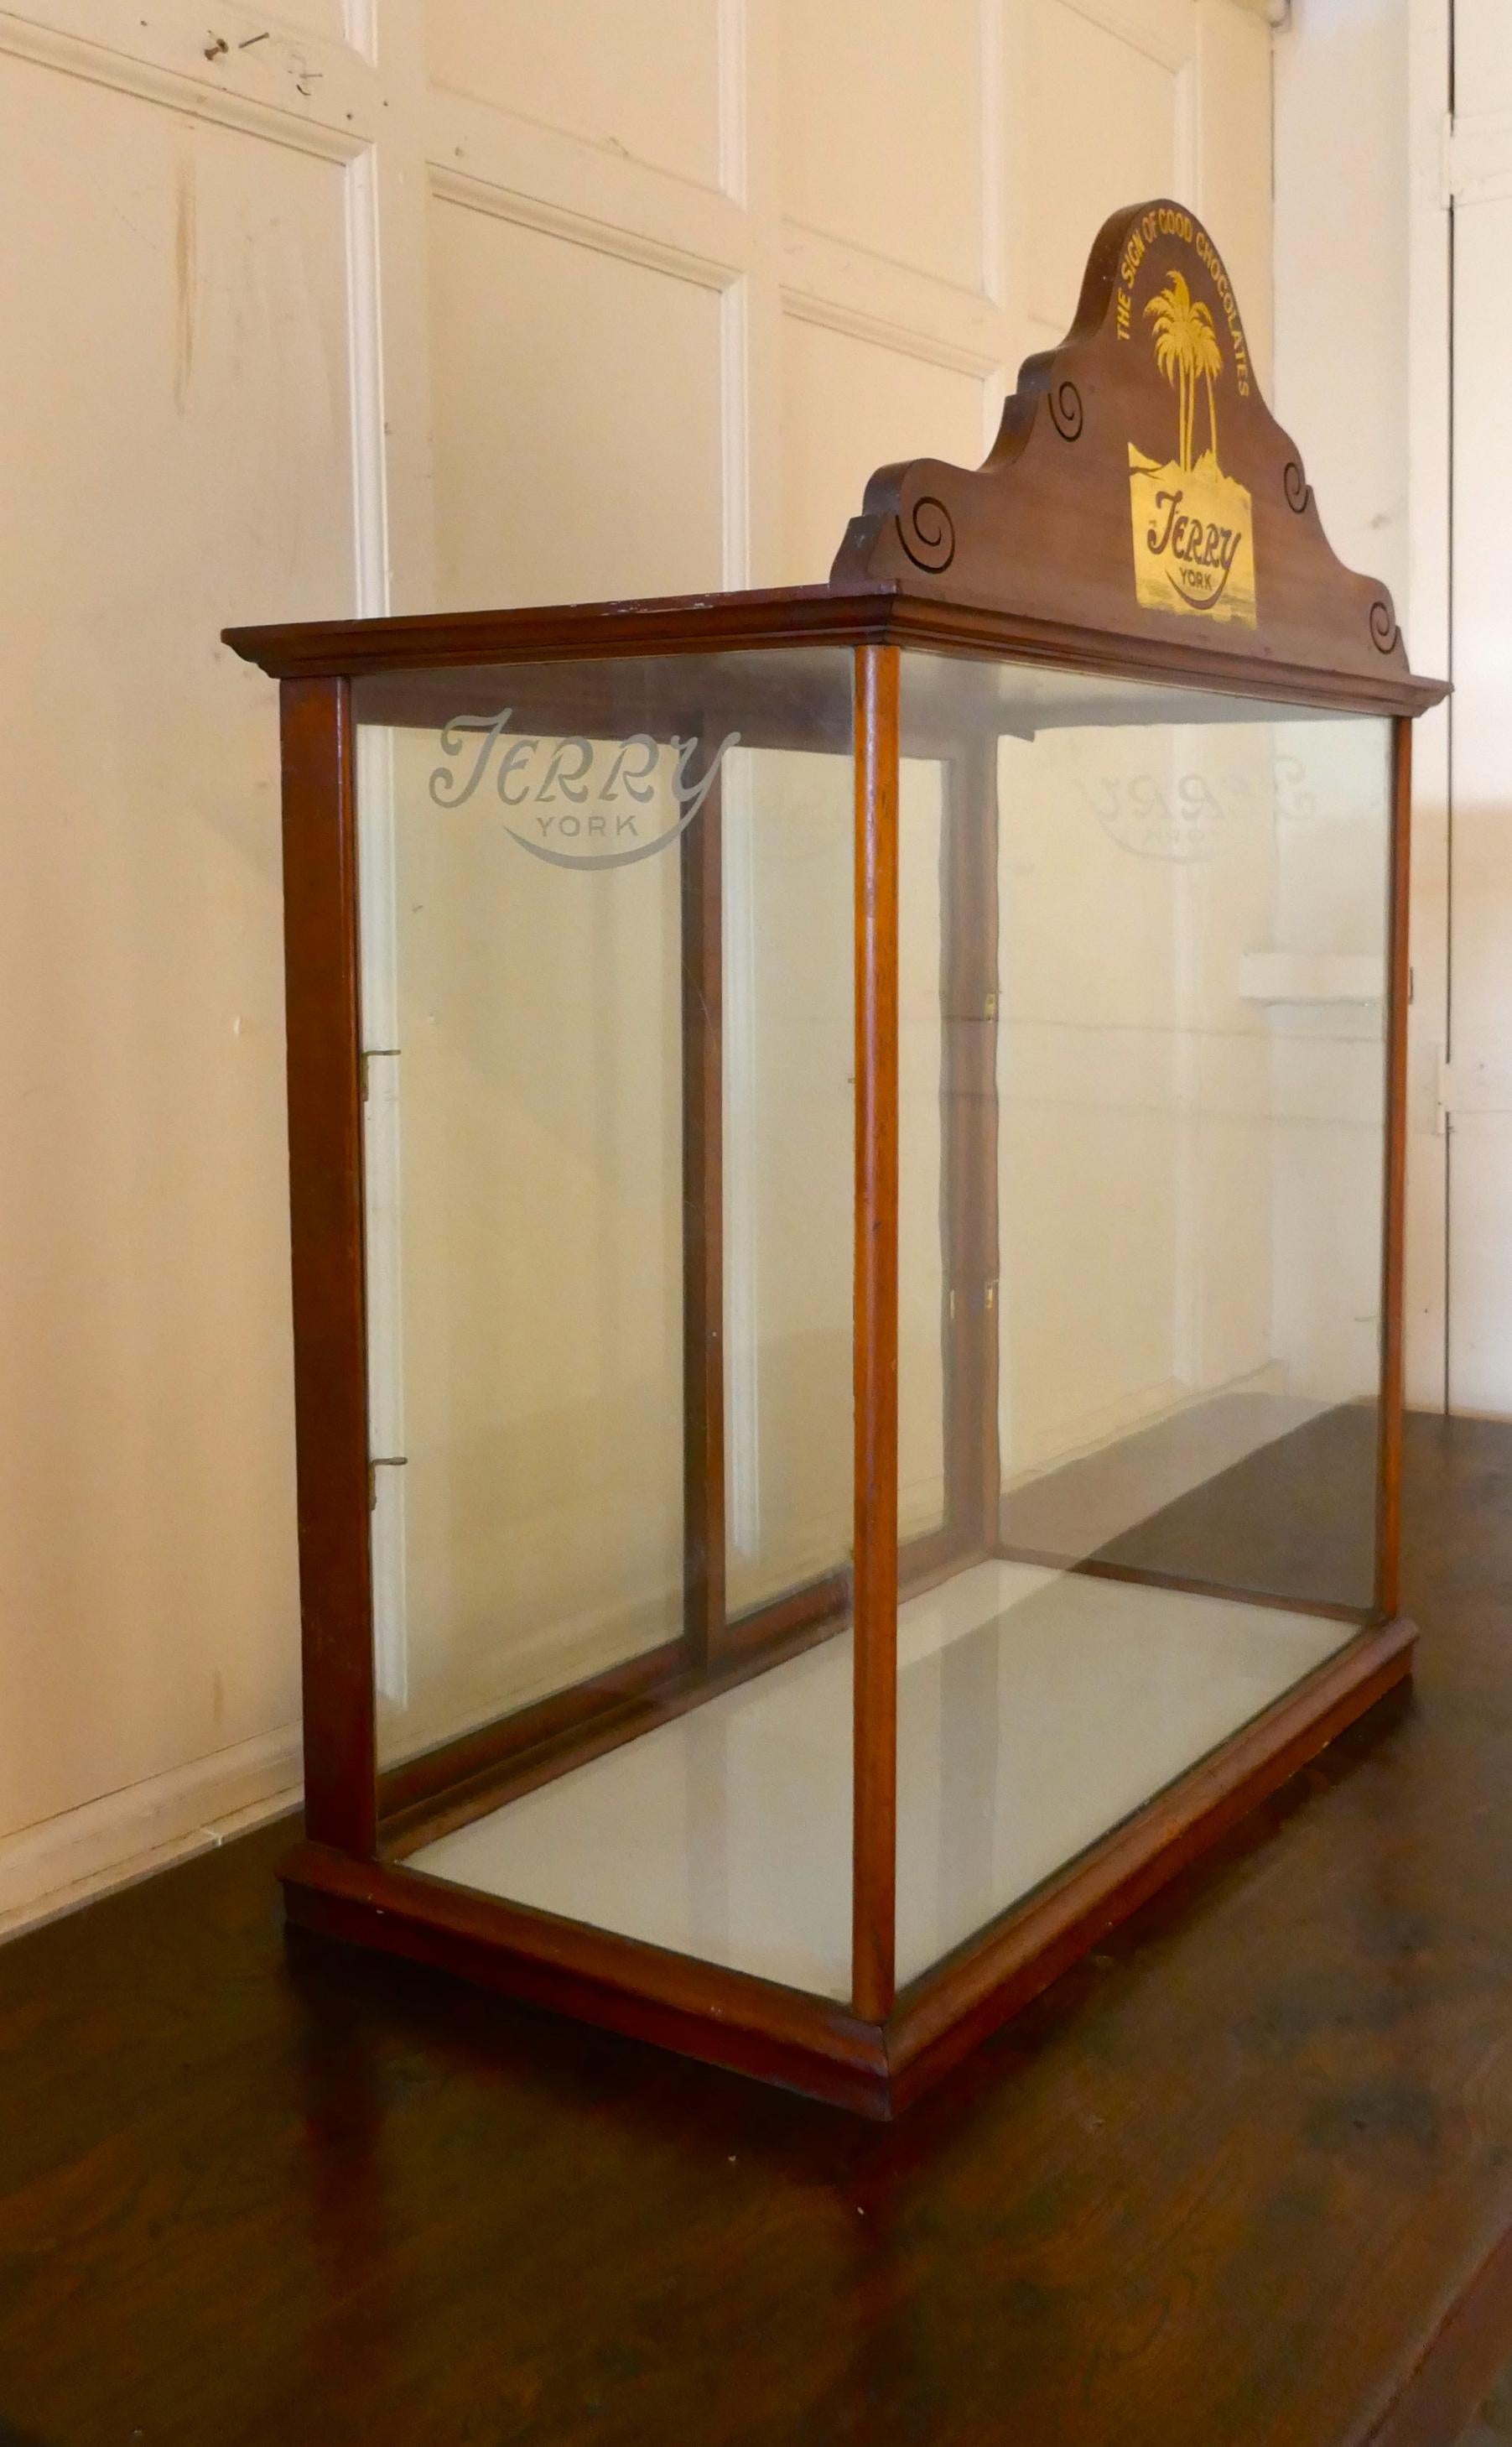 Beech Terry’s of York Chocolate Confectionary Display Cabinet     For Sale